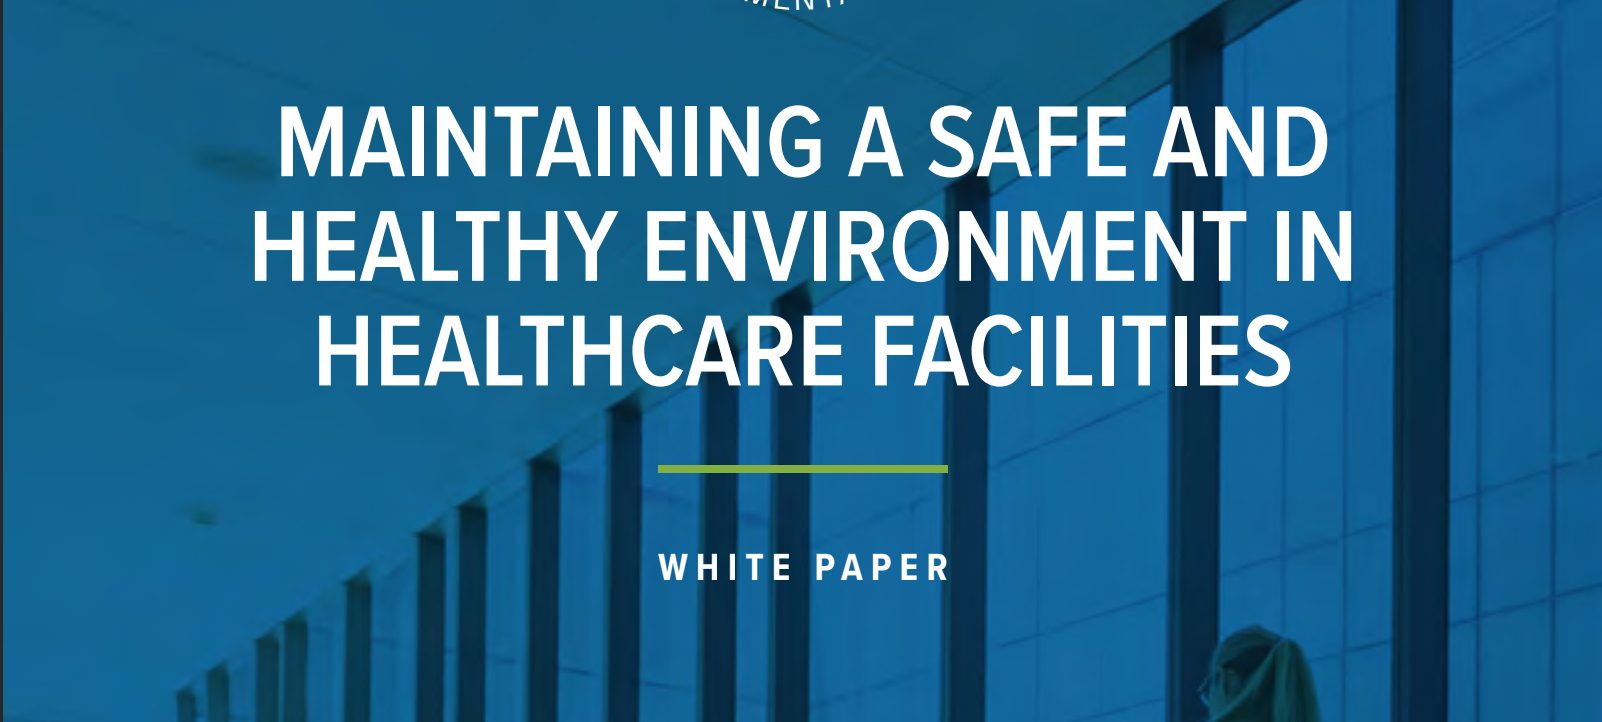 Maintaining a safe and healthy environment in healthcare facilities